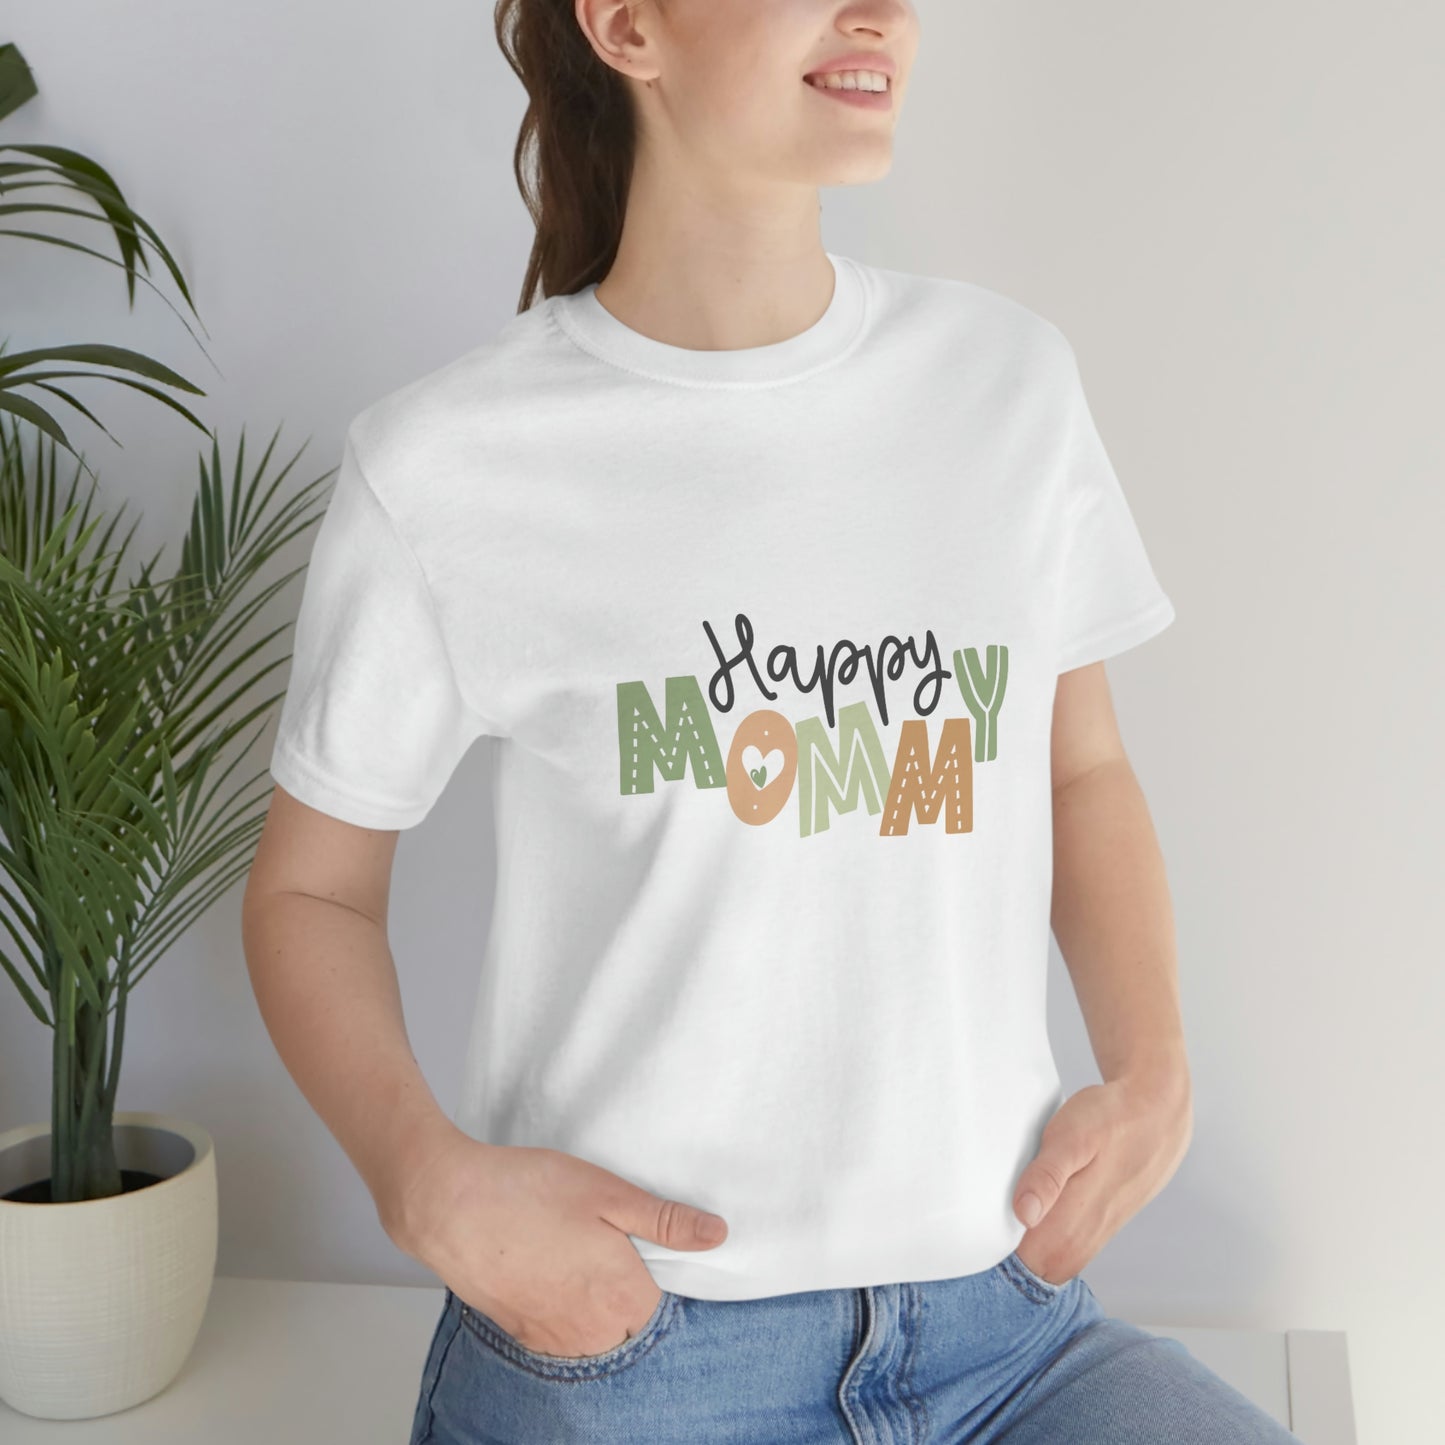 Show your mom you care with the Happy Mommy white T-shirt! The perfect gift for mom!